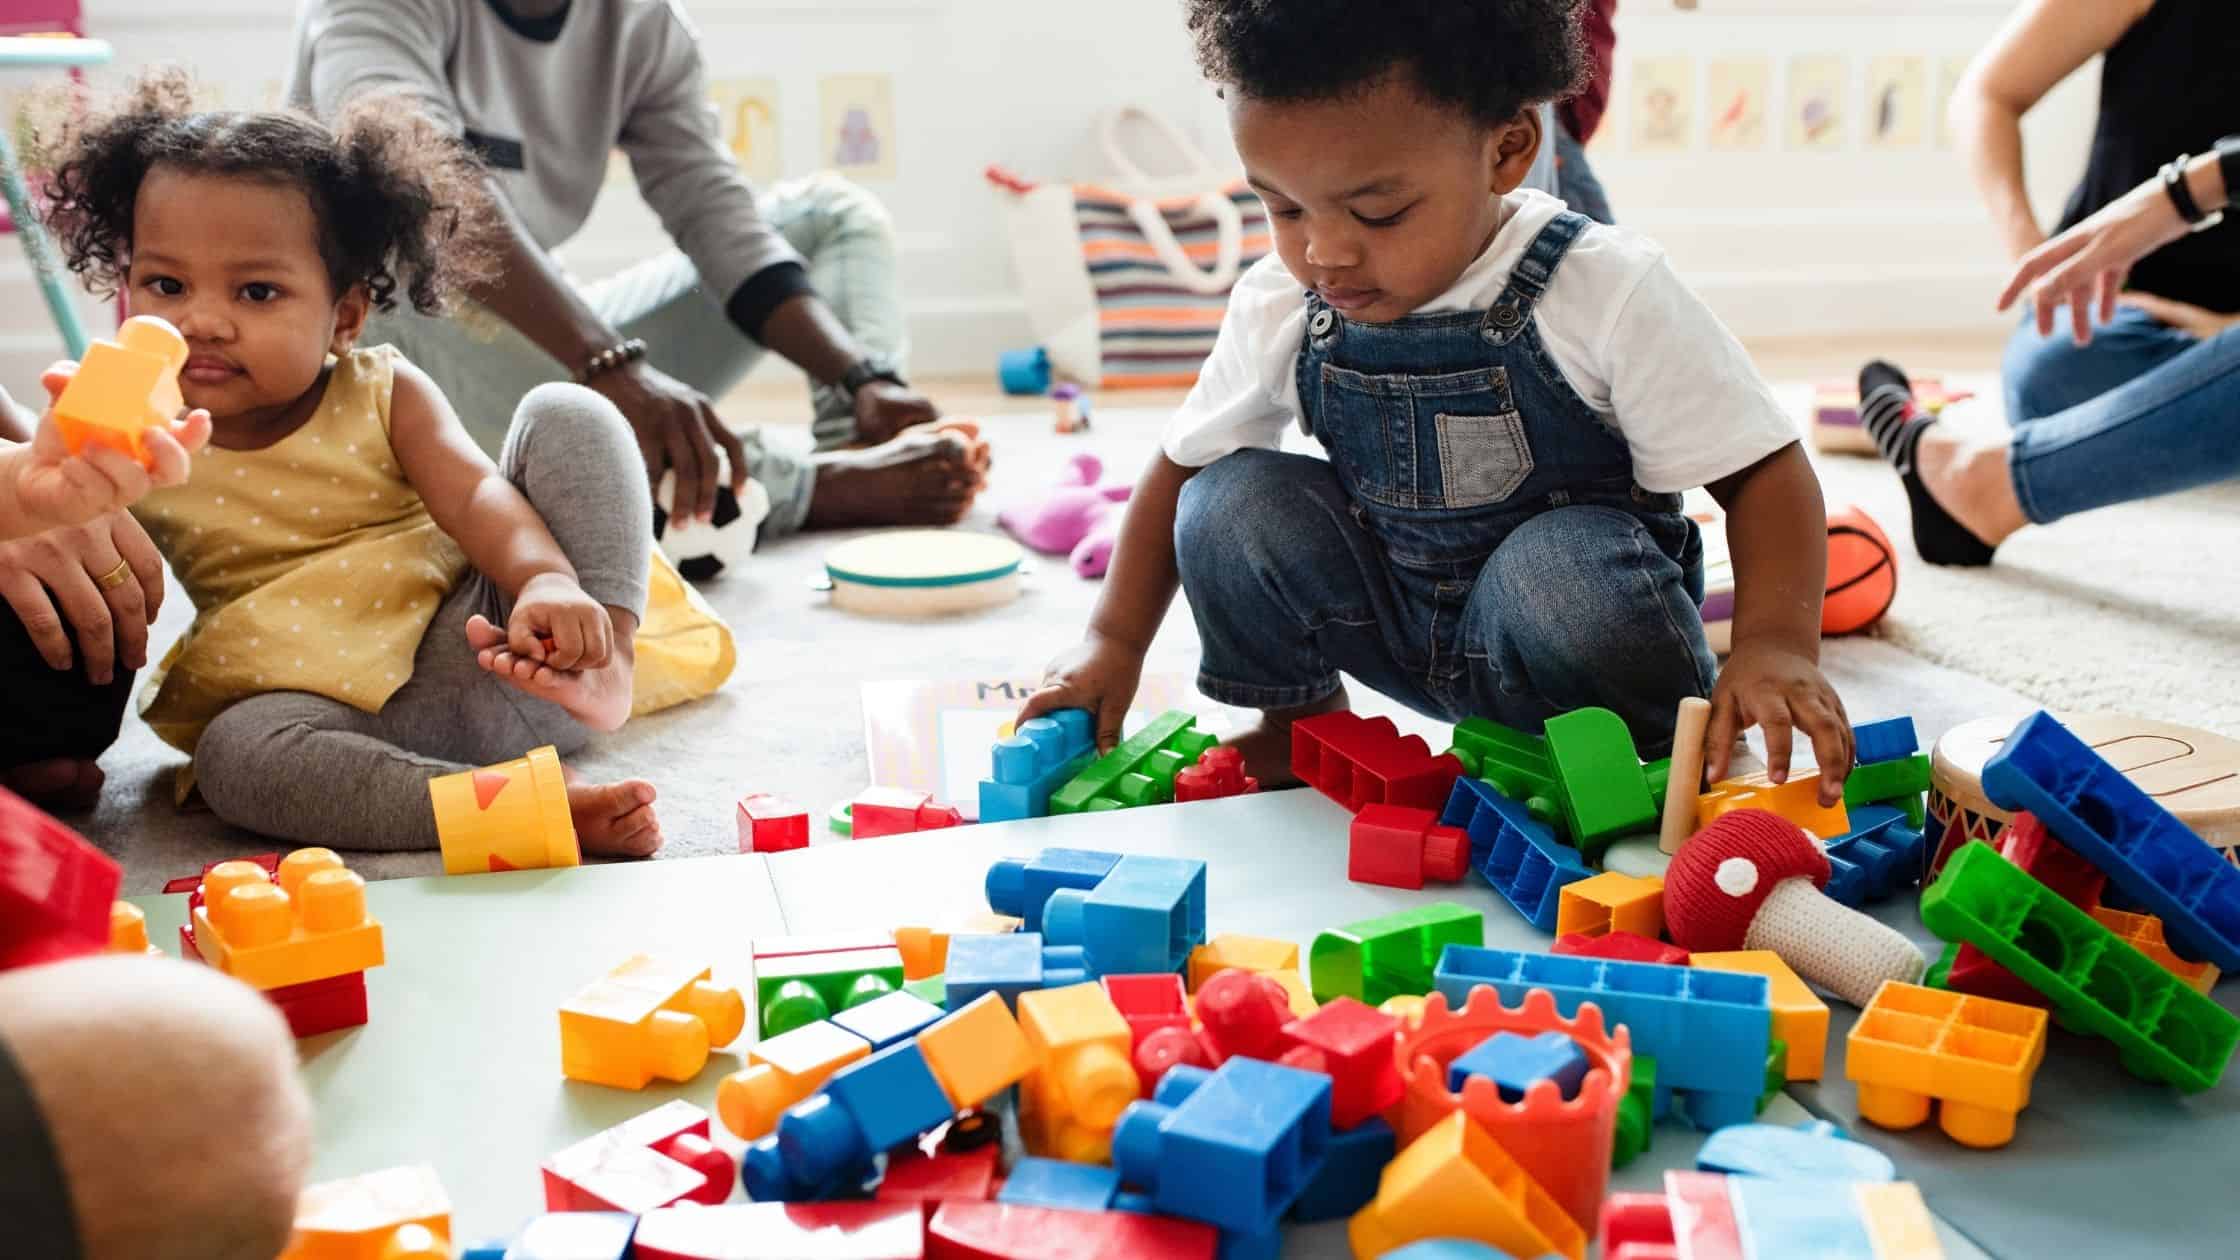 The Top 35 Toys For 3-Year-Old Kids This Holiday Season